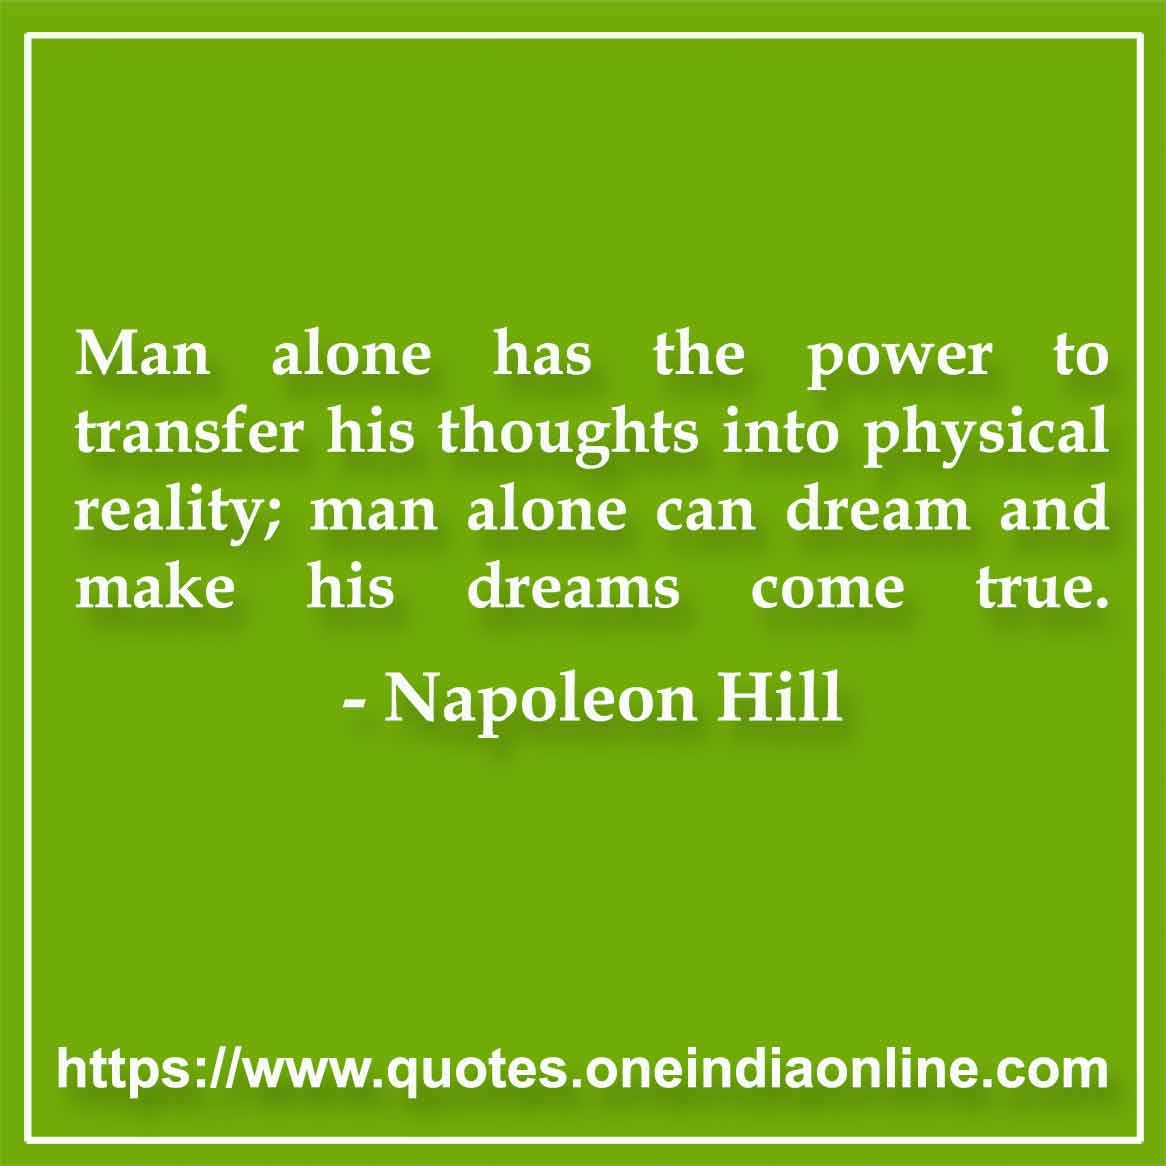 Man alone has the power to transfer his thoughts into physical reality; man alone can dream and make his dreams come true.

-by Napoleon Hill